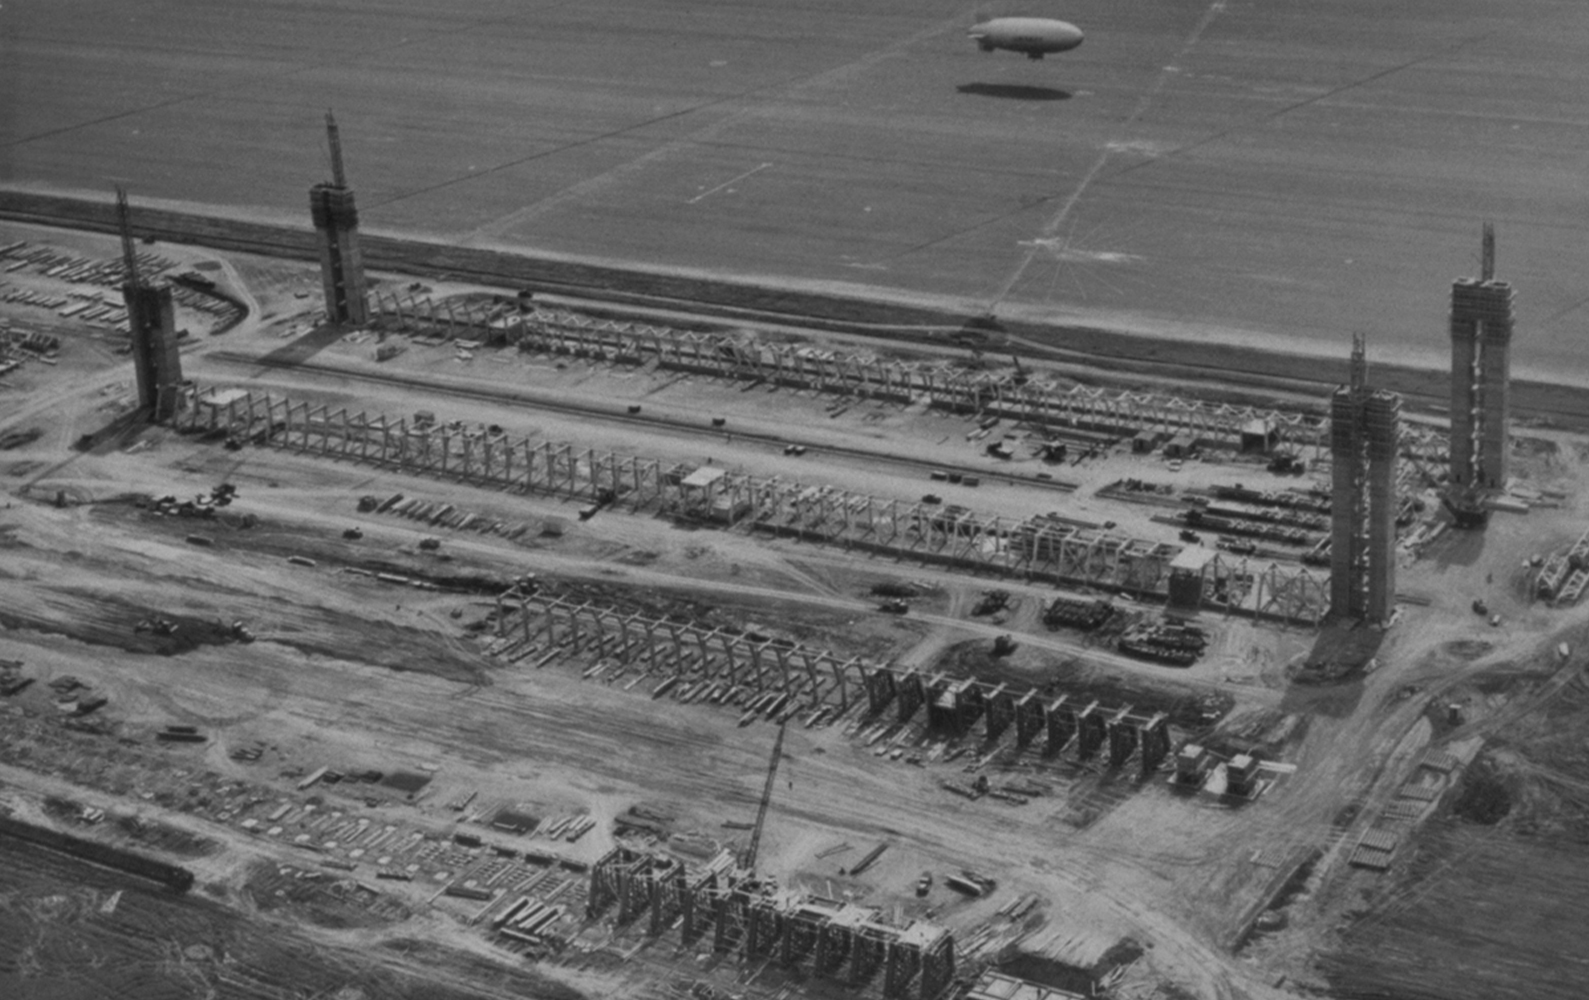 A birds-eye view of the early phase of construction for 2 blimp hangars located side-by-side. 4 concrete door towers rise from the Hangar 2 site.